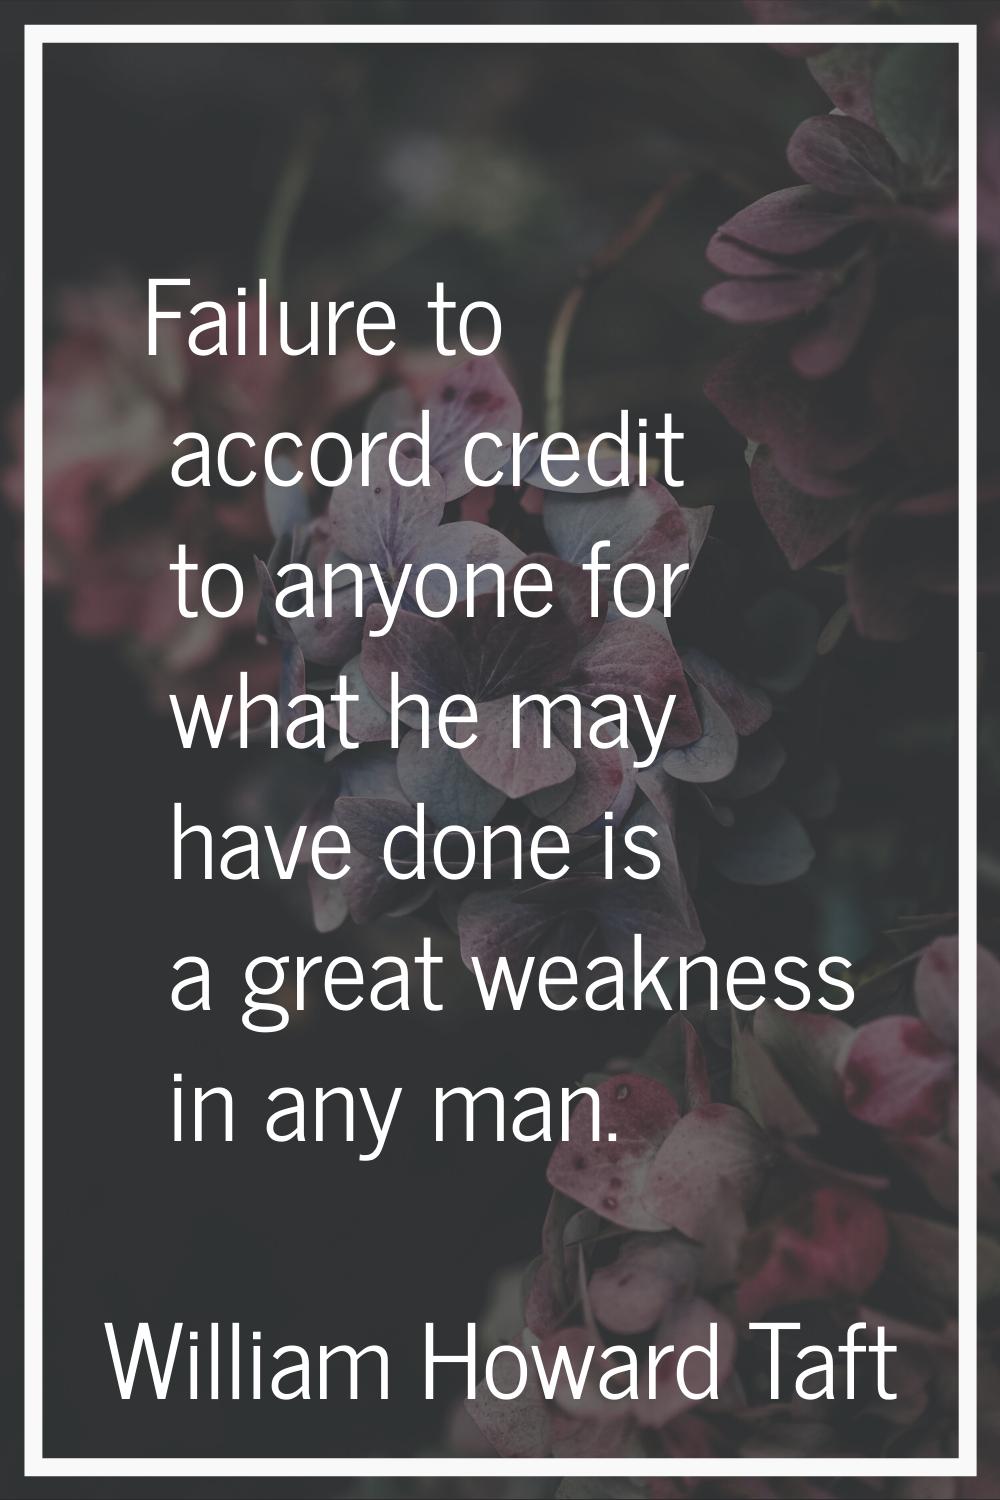 Failure to accord credit to anyone for what he may have done is a great weakness in any man.